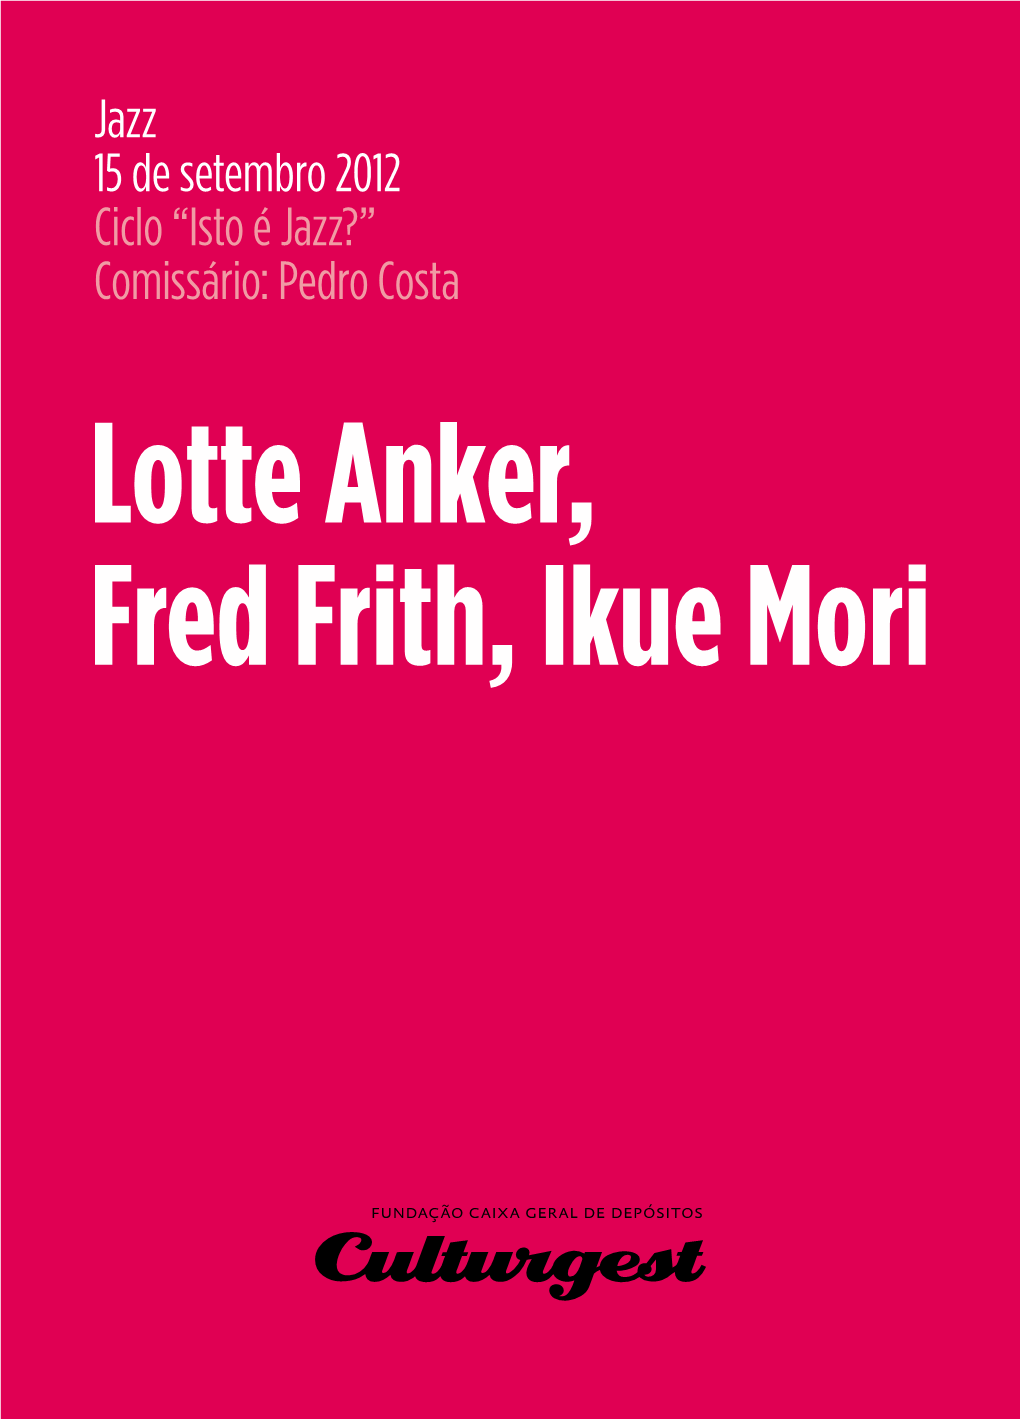 Lotte Anker, Fred Frith, Ikue Mori